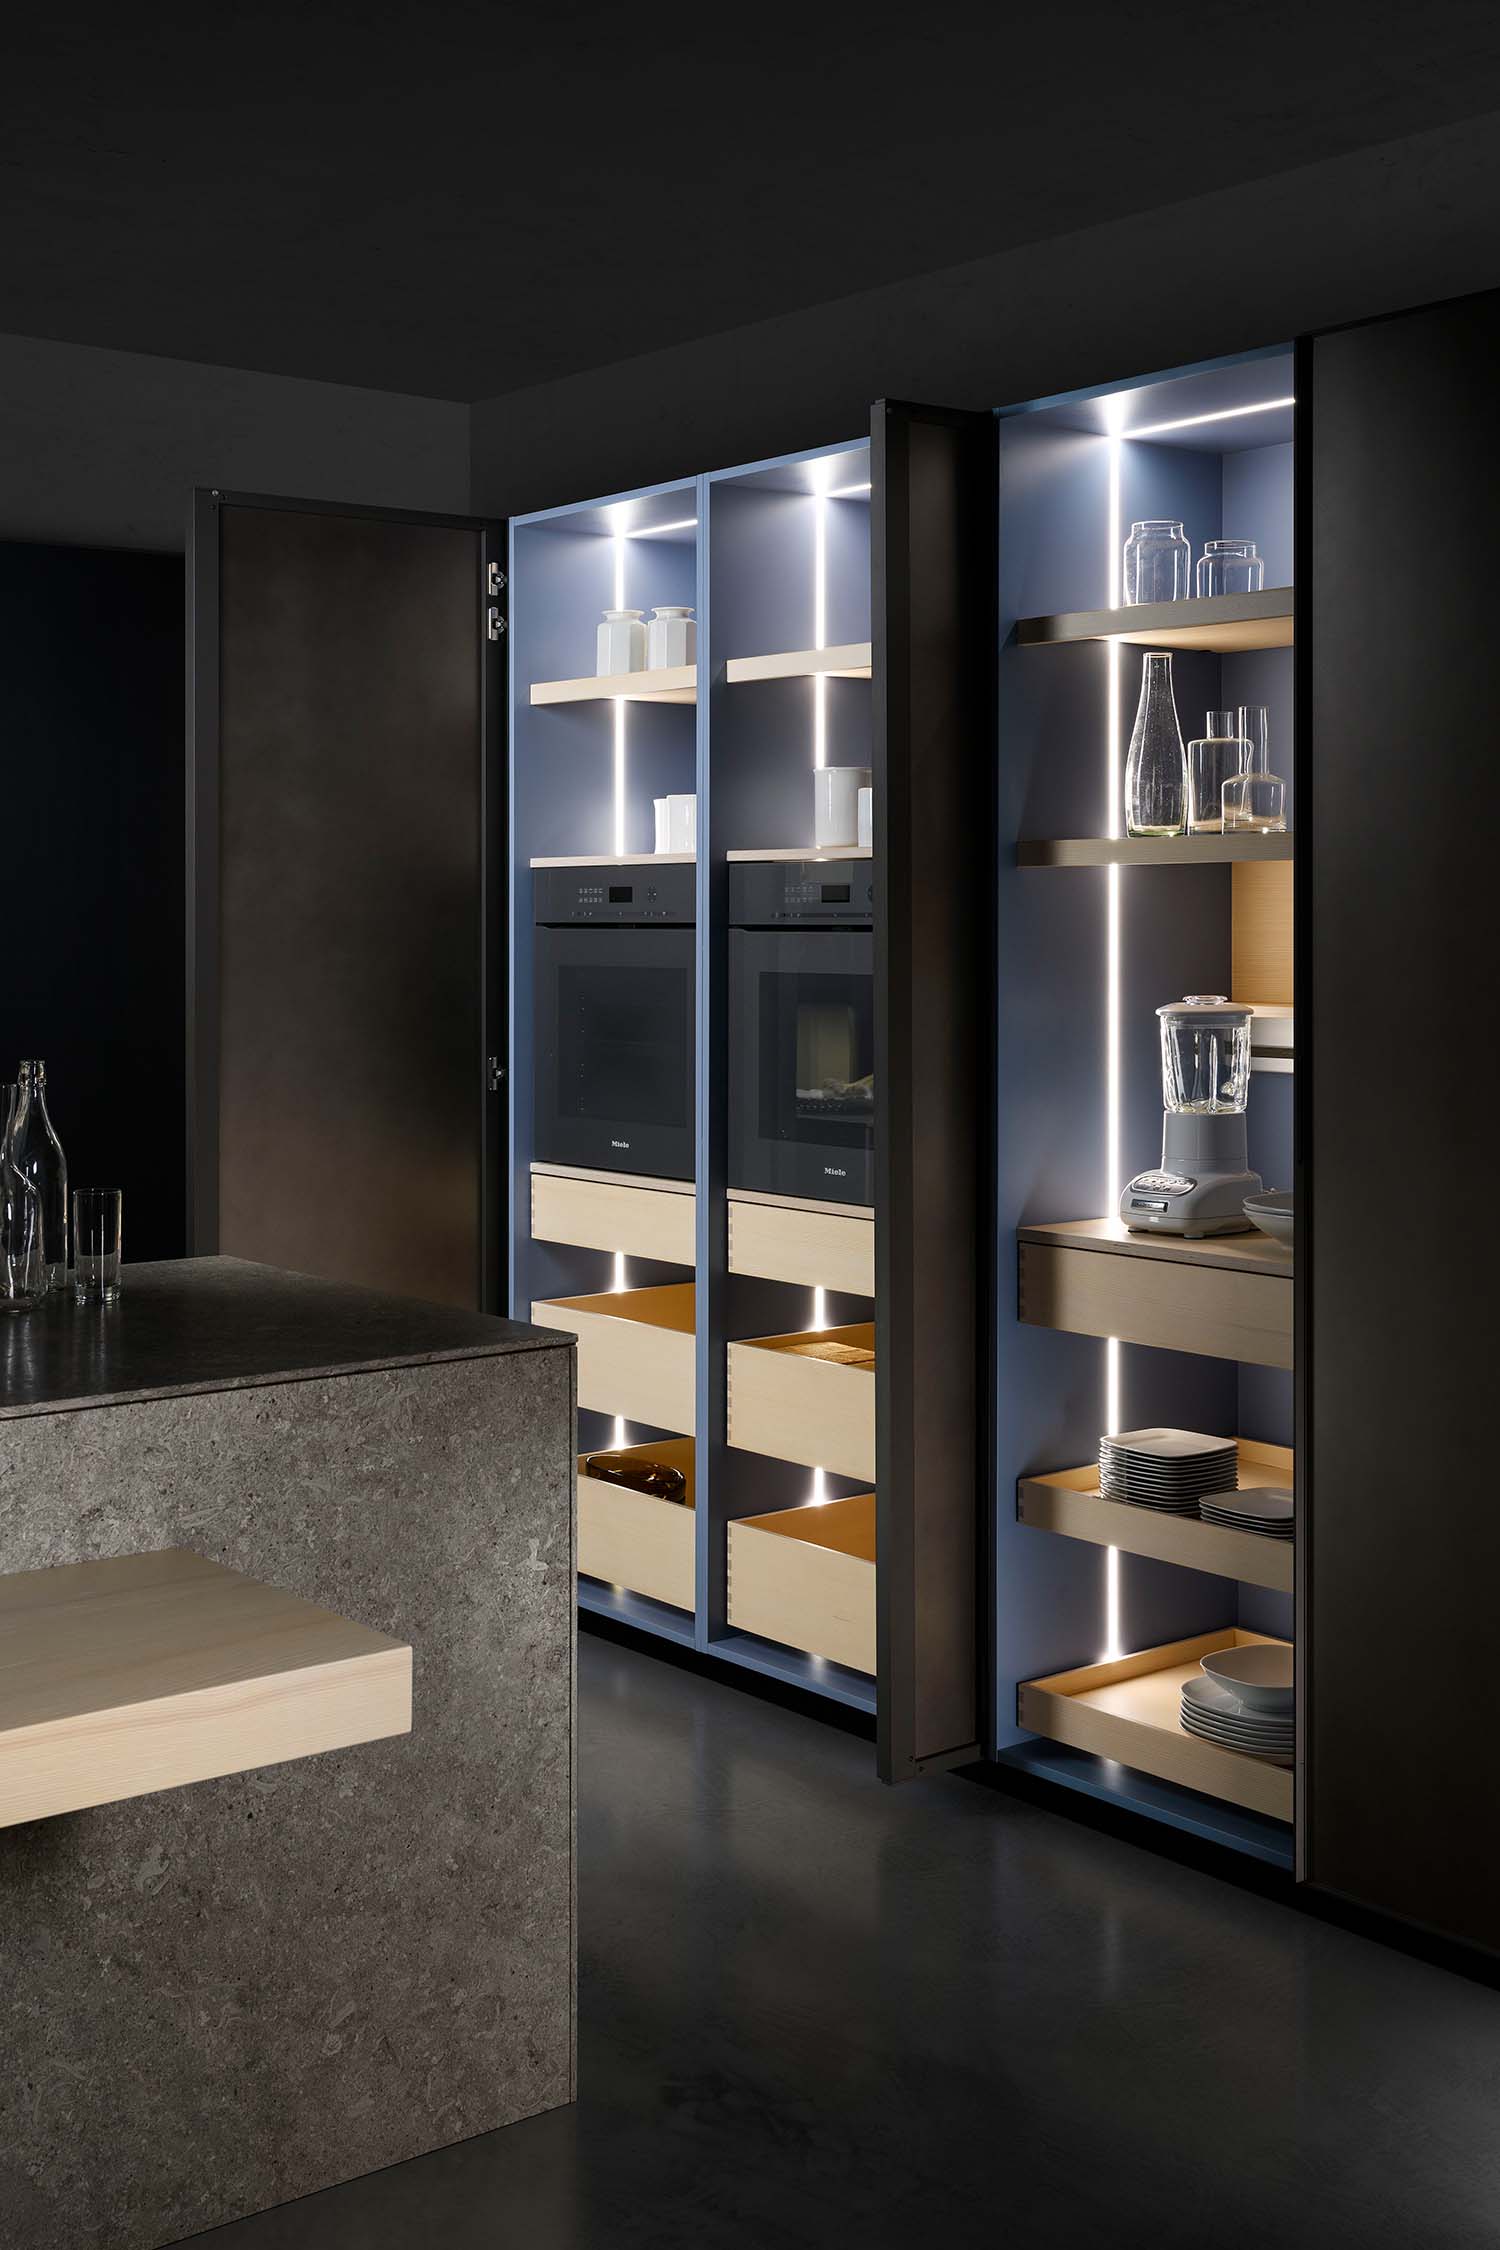 Large tall units contain and hide large integrated kitchen appliances and hidden storage, all finished in luxury Scandinavian style wood veneer.